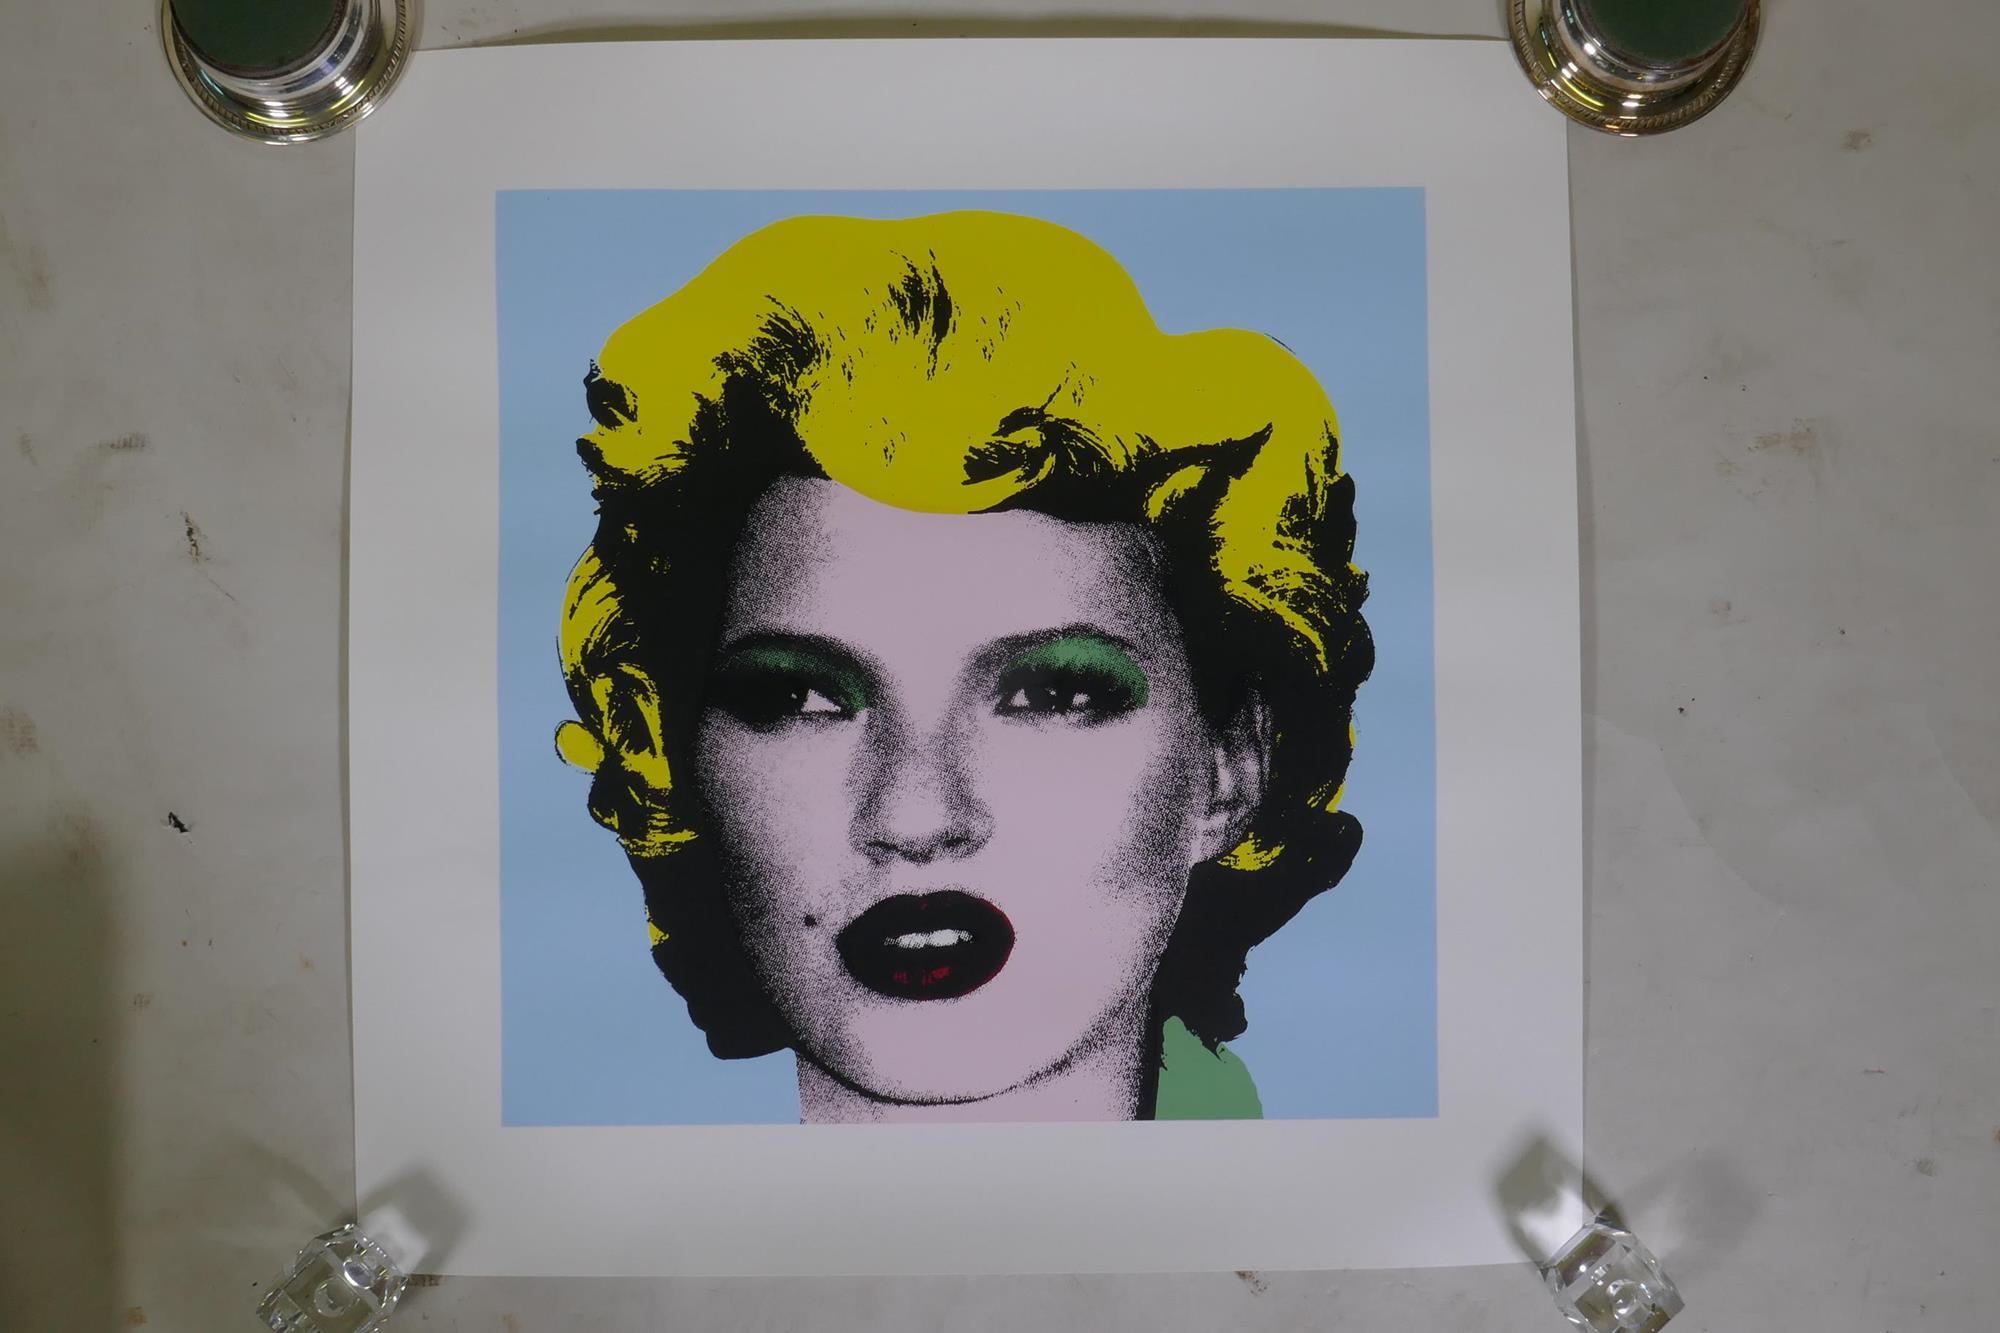 After Banksy, Kate Moss, limited edition copy screen print No 290/500, by the West Country Prince, - Image 2 of 4